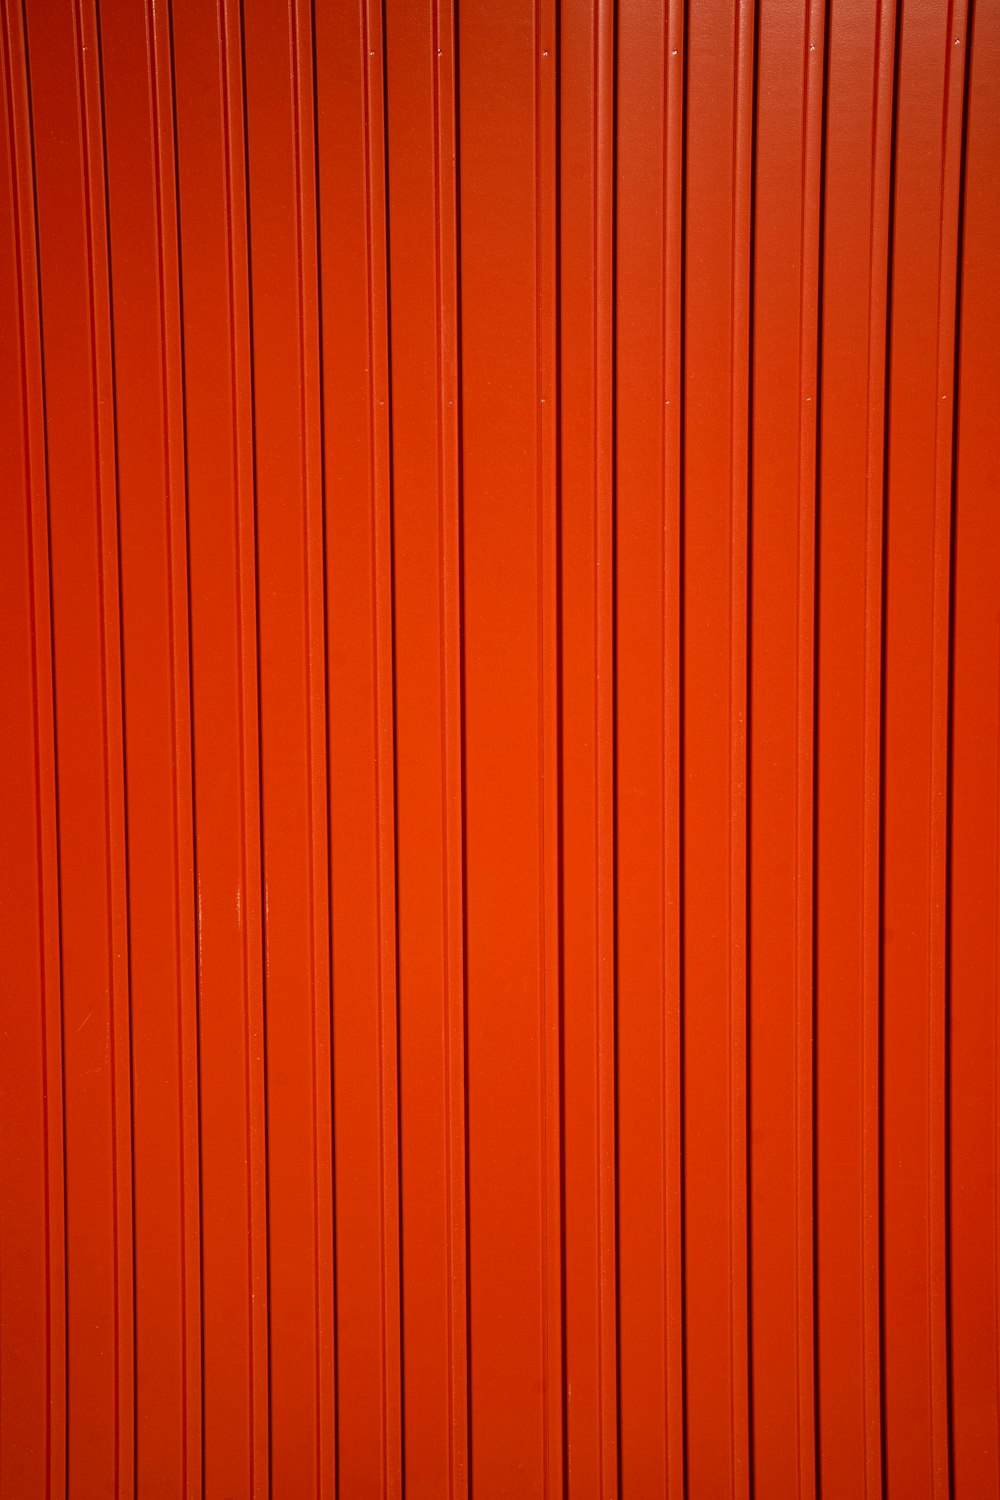 red and yellow striped background